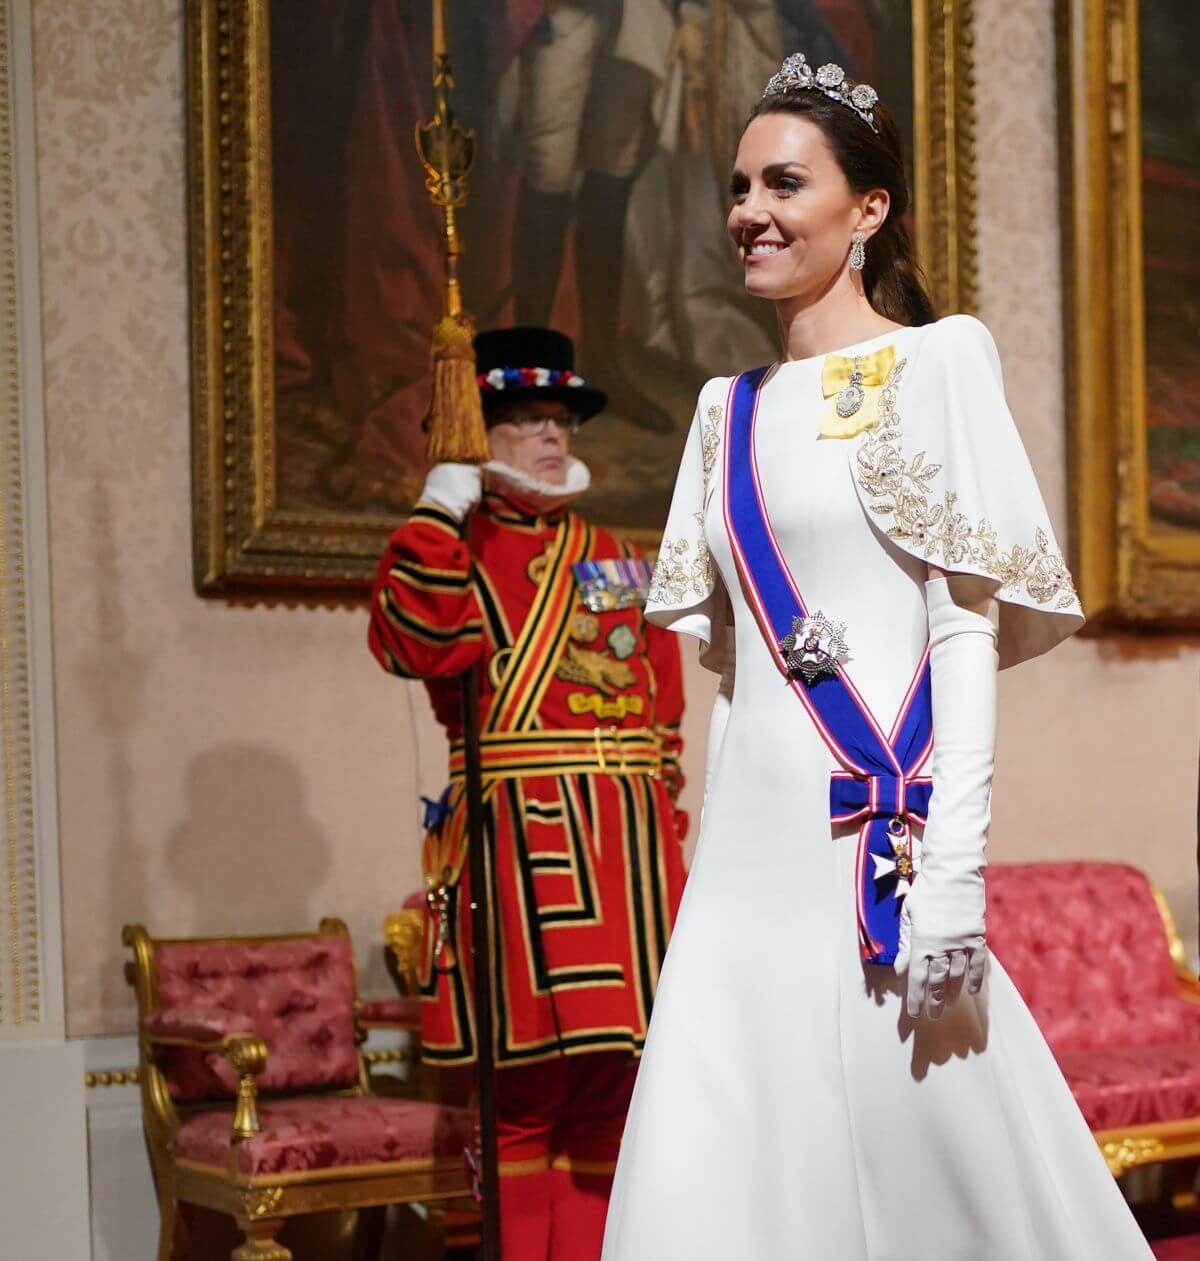 Kate Middleton dons a white gown for a State Banquet at Buckingham Palace